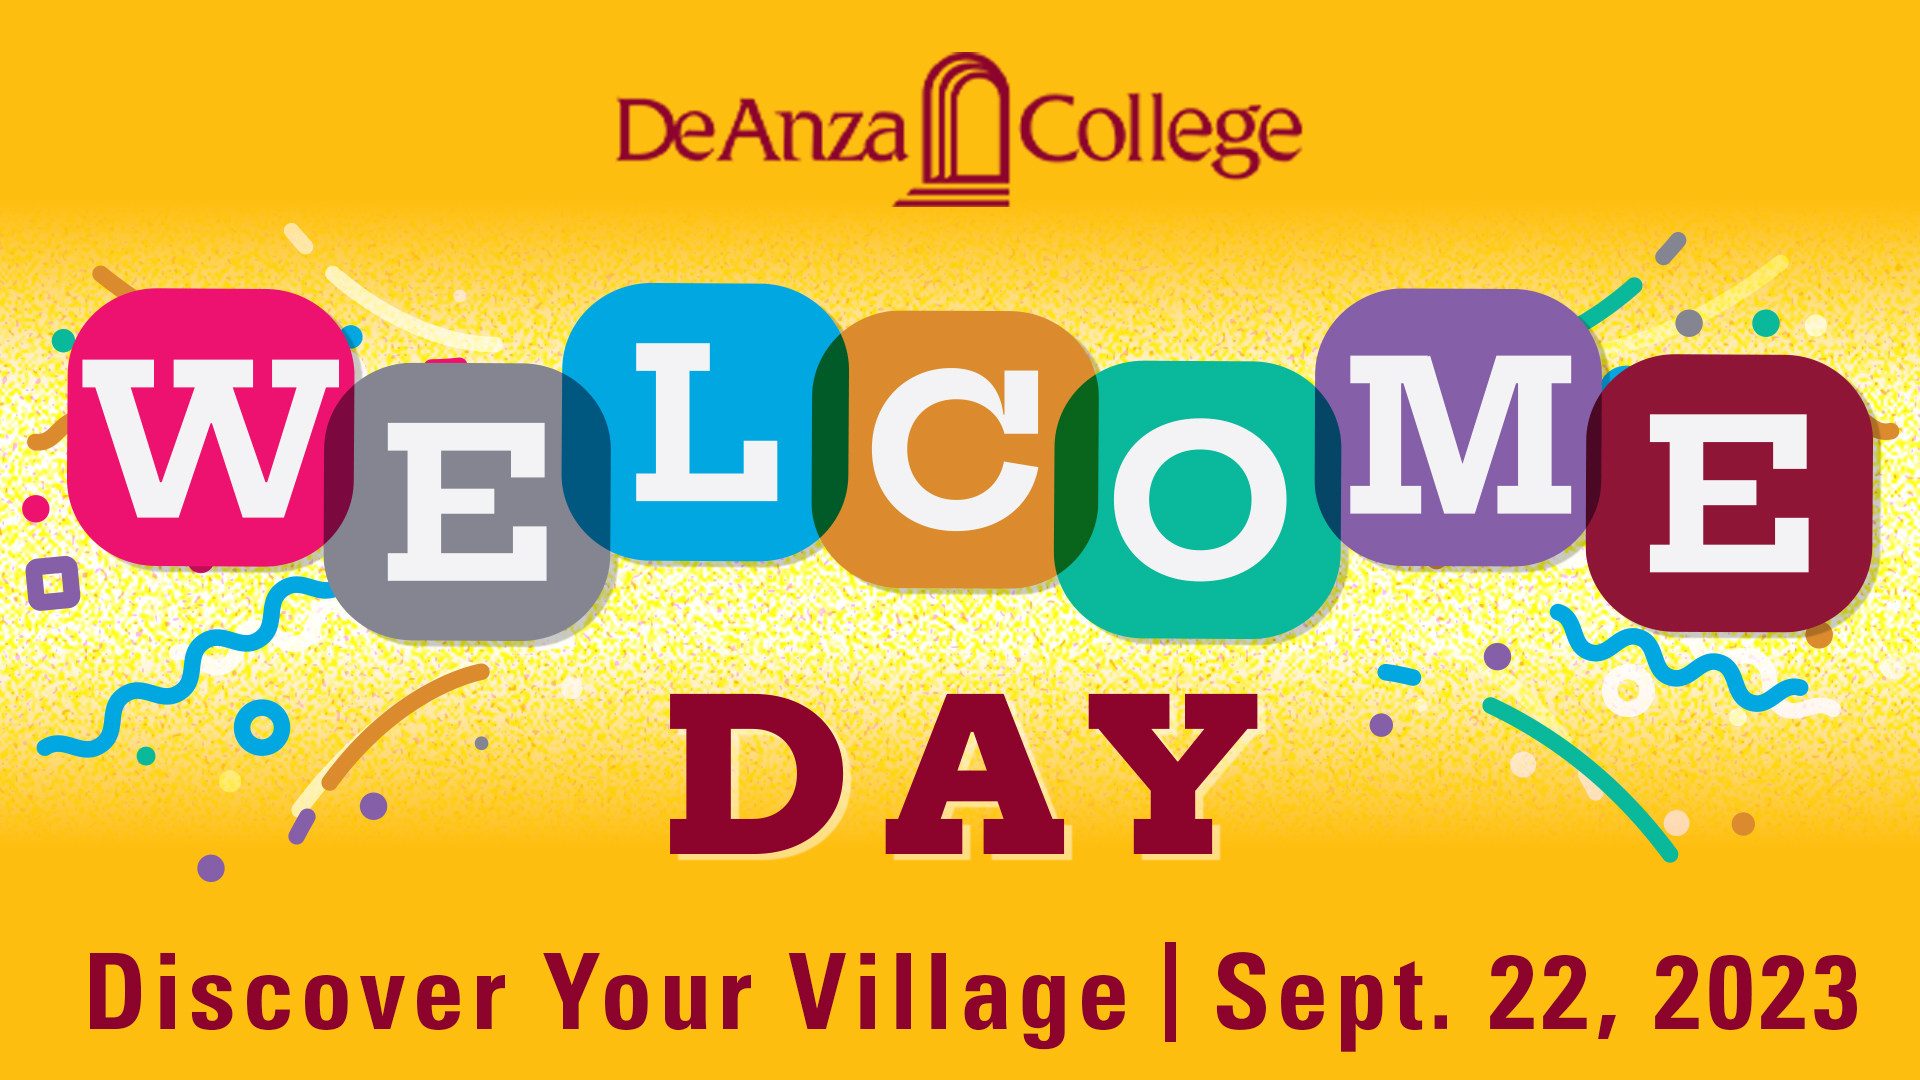 De Anza College Welcome Day Discover Your Village Sept. 22, 2023